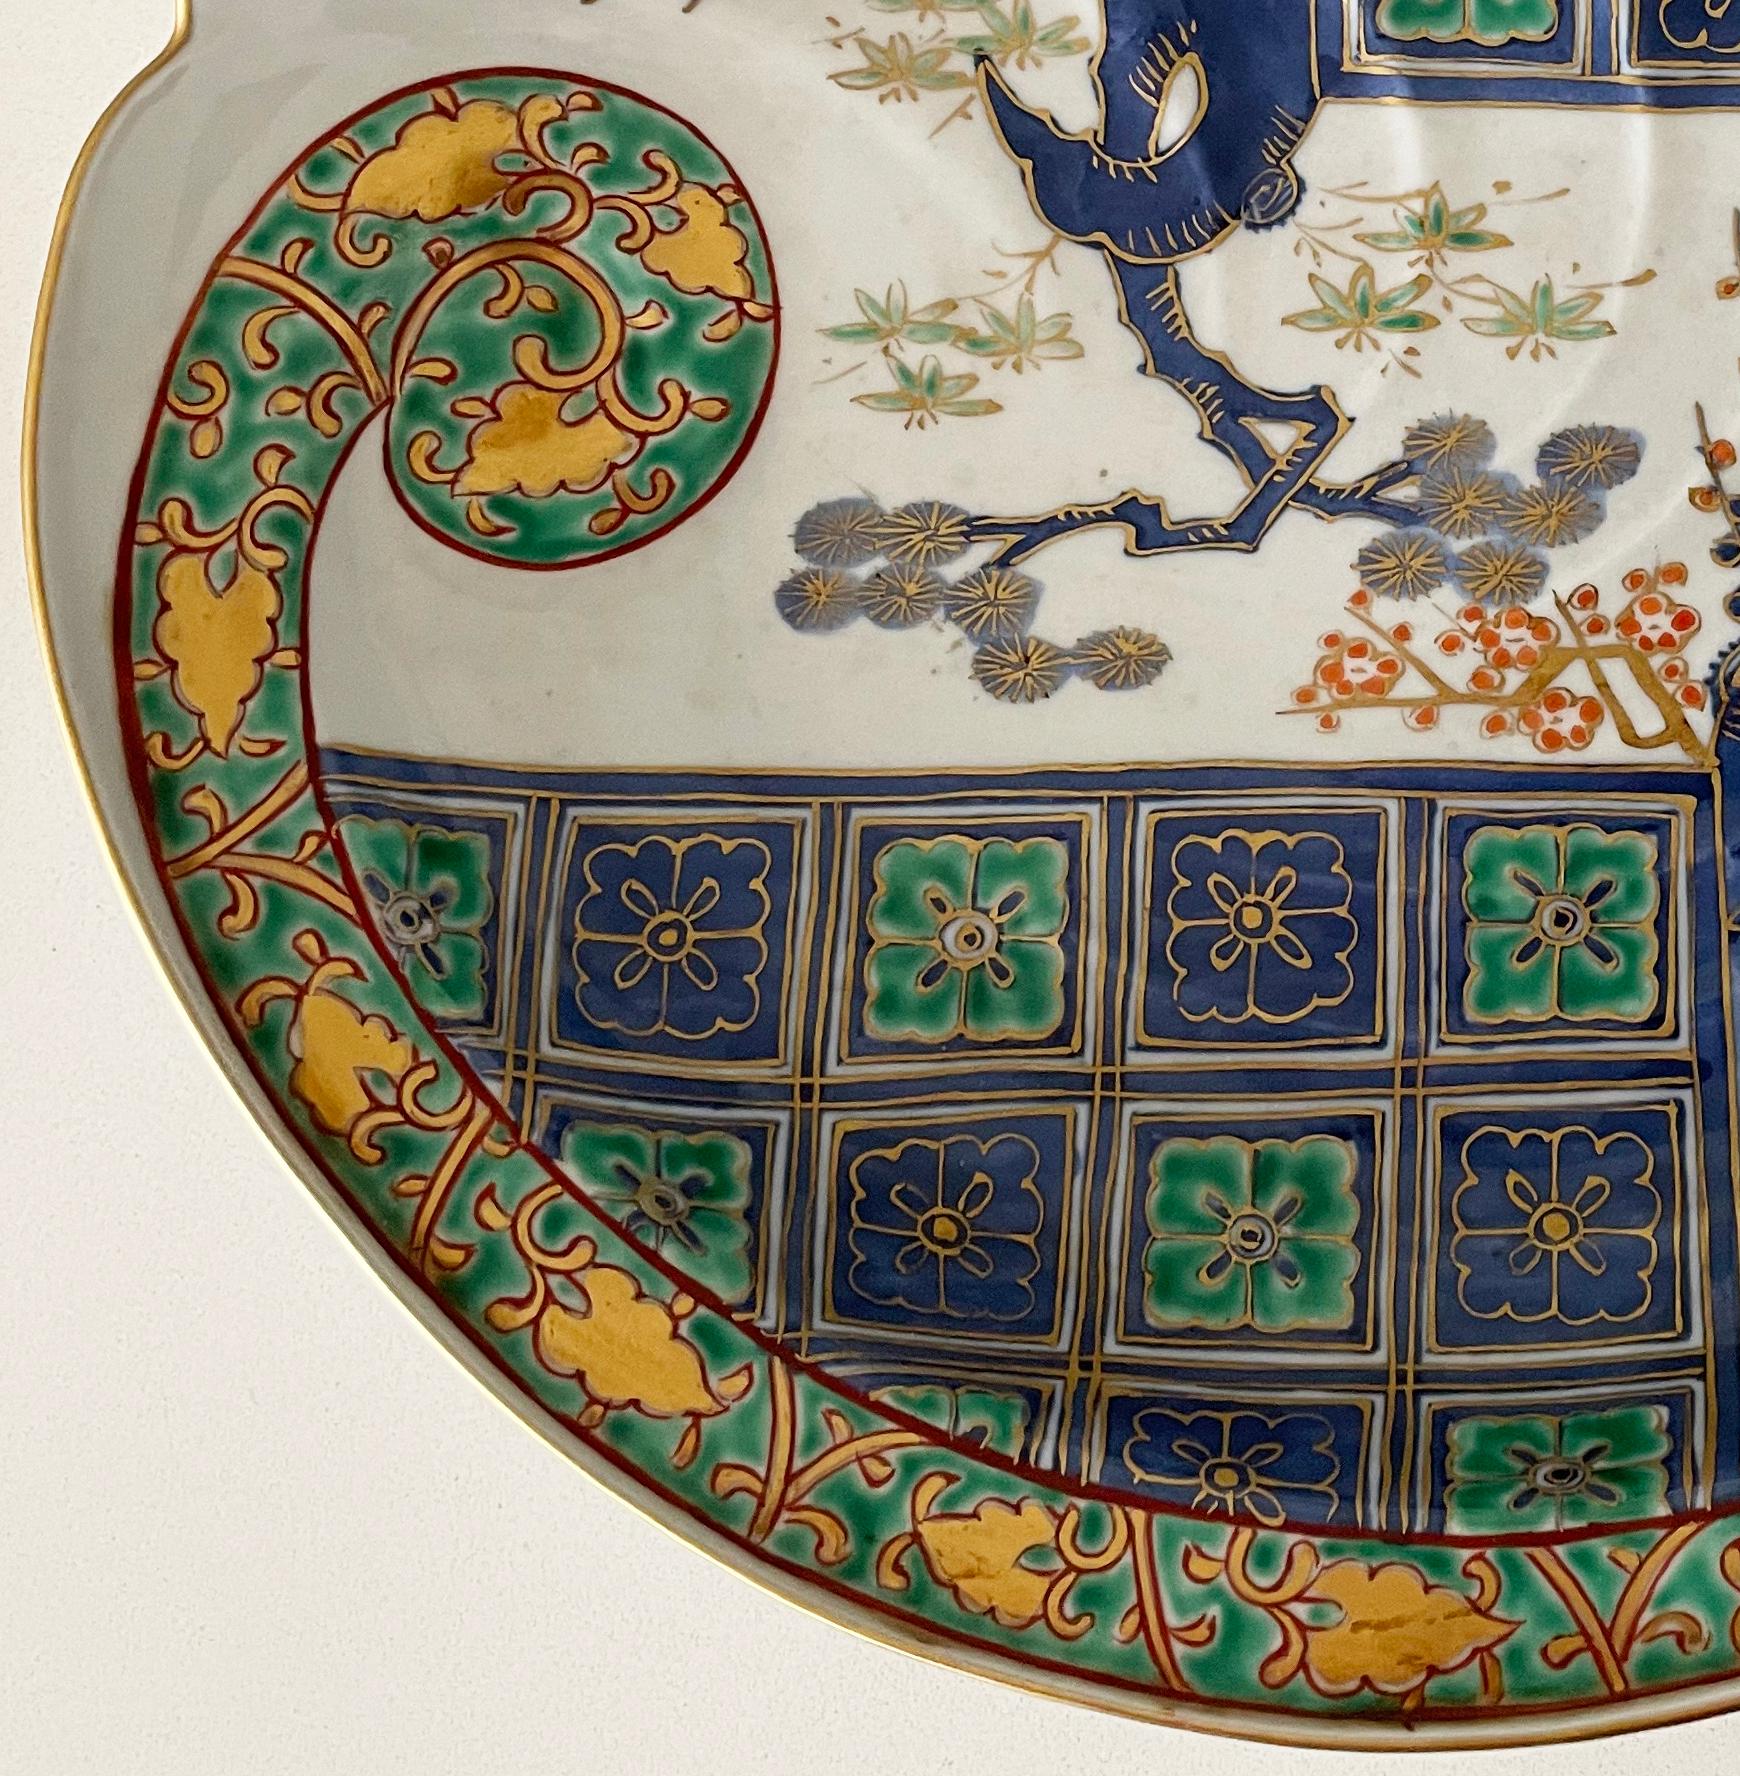 A beautiful hand-painted Japanese Imari contoured glazed shell dish with fluted edge to the top half, profusely decorated in geometric floral patterns with a sweeping vine scroll and prunus in vibrant shades of blue, orange, green and white with